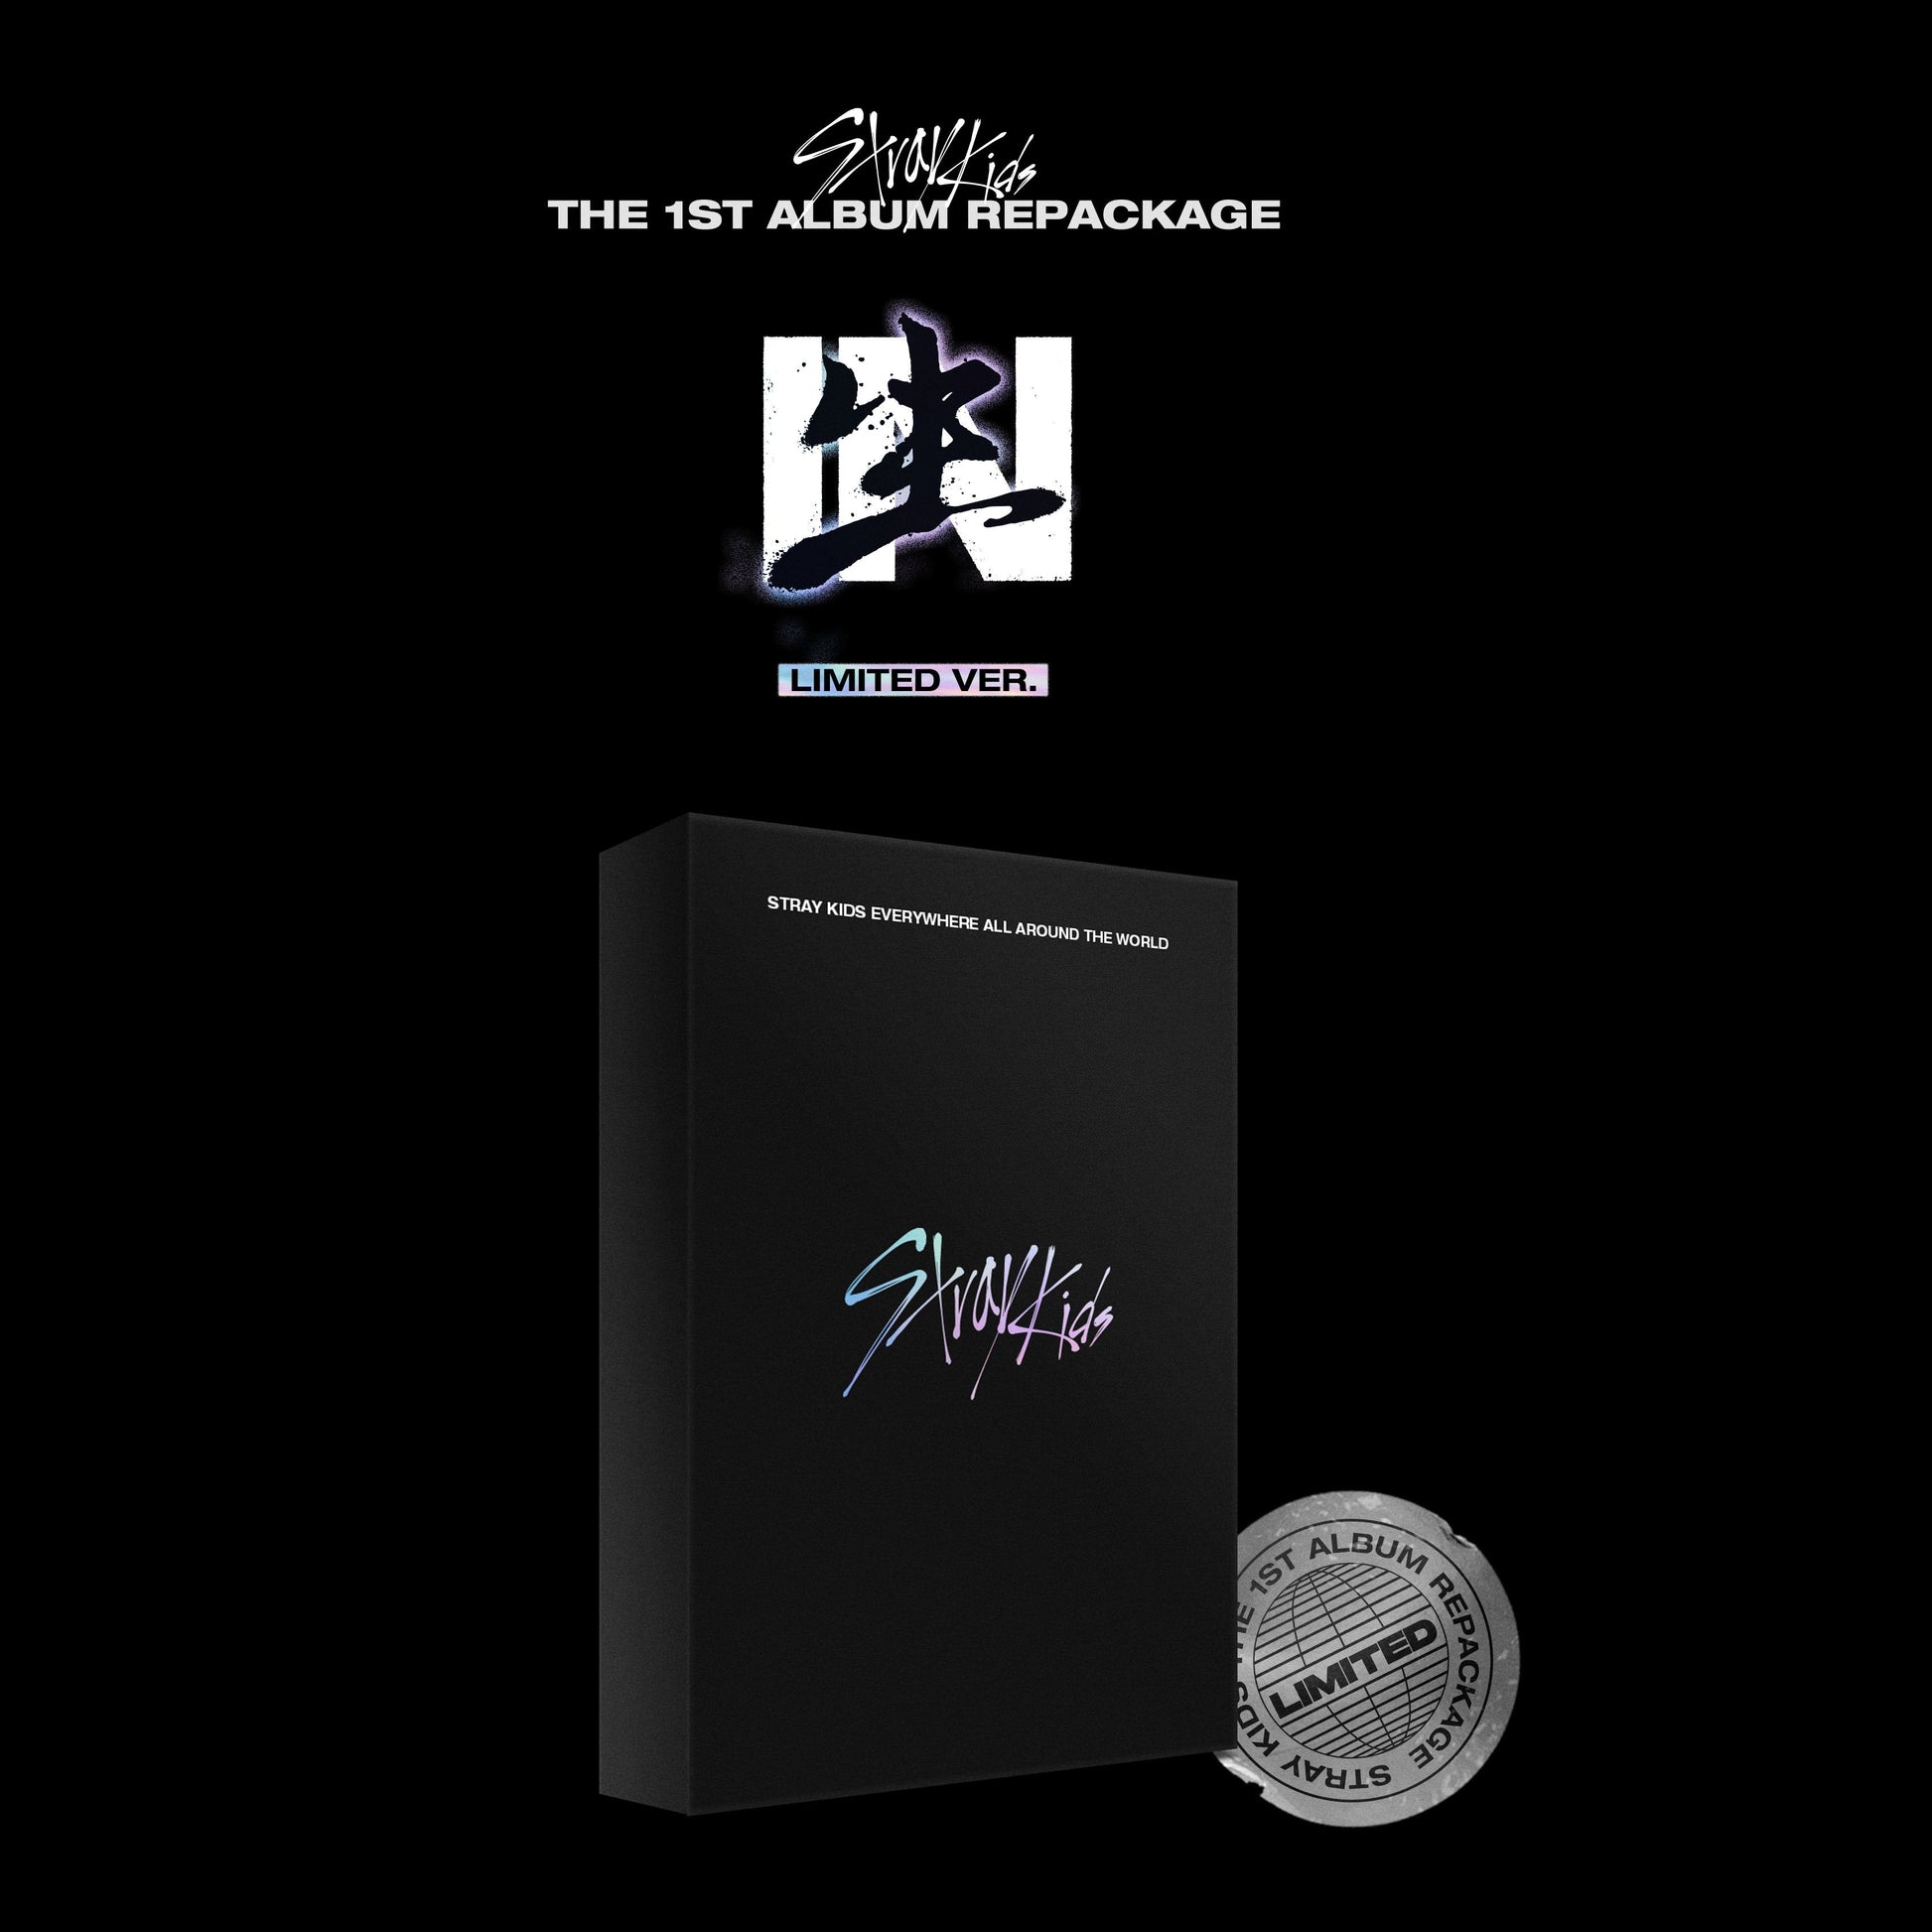 STRAY KIDS 1ST ALBUM REPACKAGE 'IN生 (IN LIFE)' LIMITED VERSION COVER